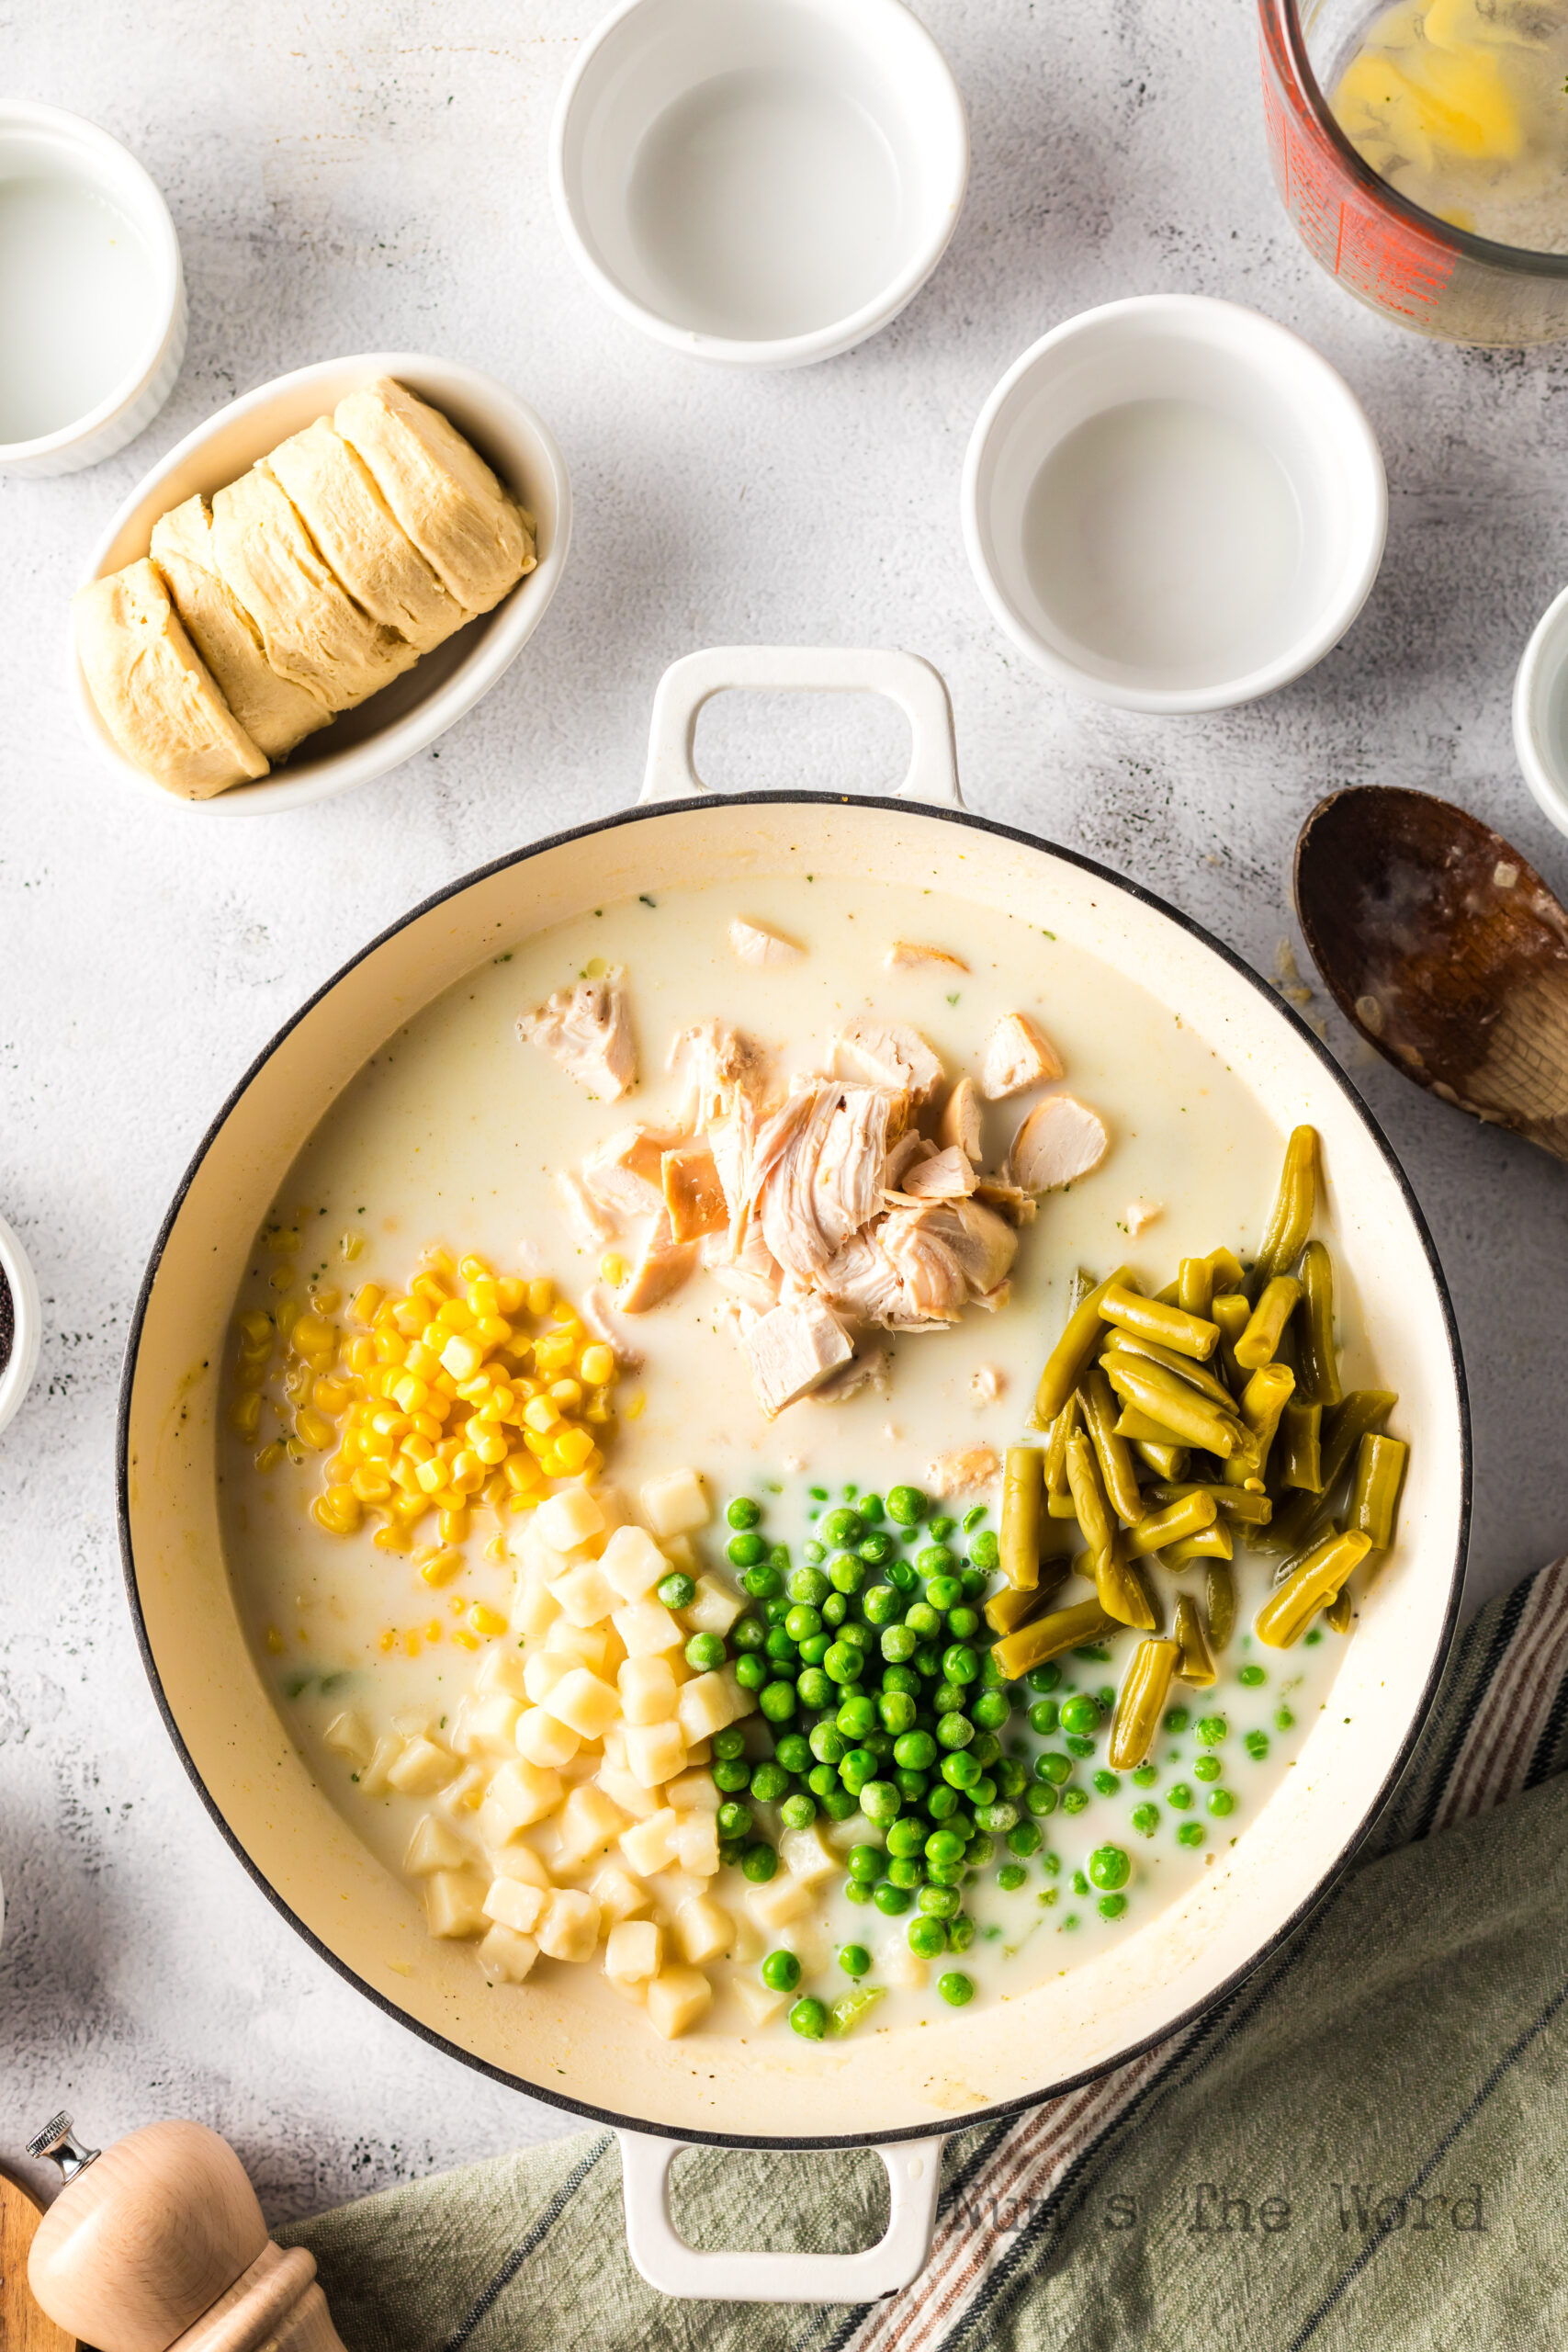 Chicken, Corn, potatoes, green beans and peas added to creamy mixture